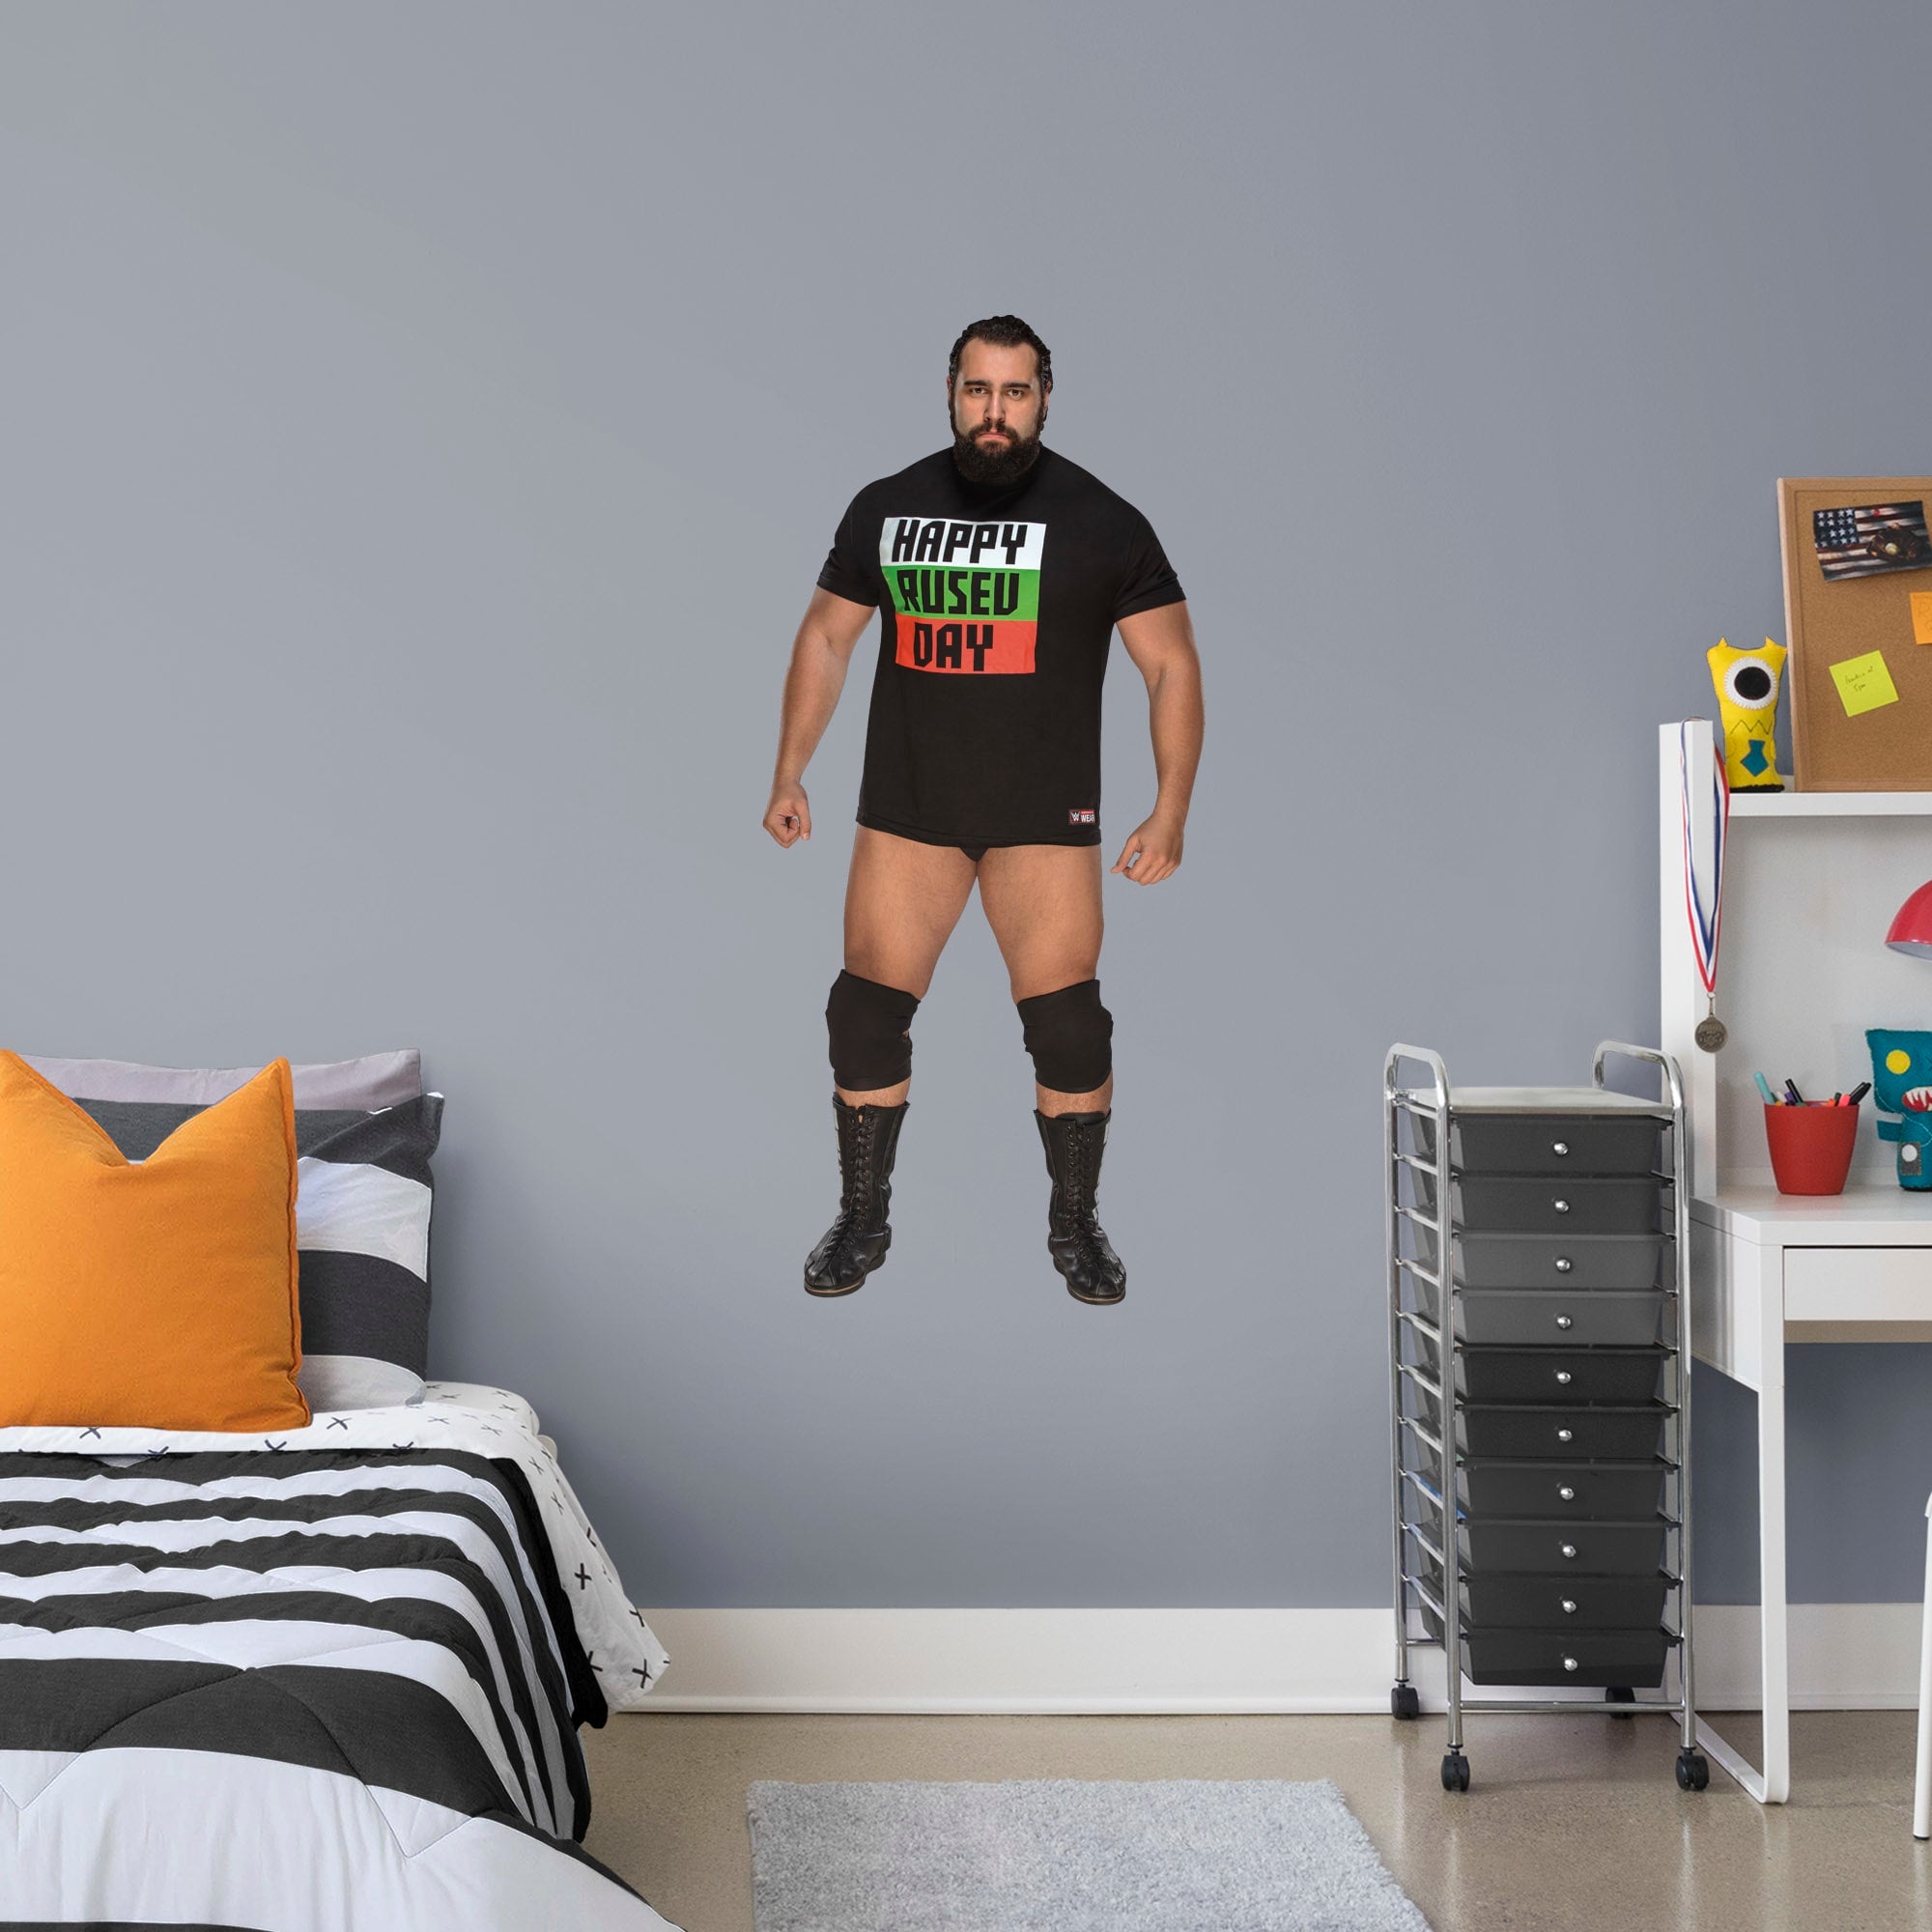 Rusev for WWE - Officially Licensed Removable Wall Decal Giant Superstar + 2 Decals (23"W x 51"H) by Fathead | Vinyl